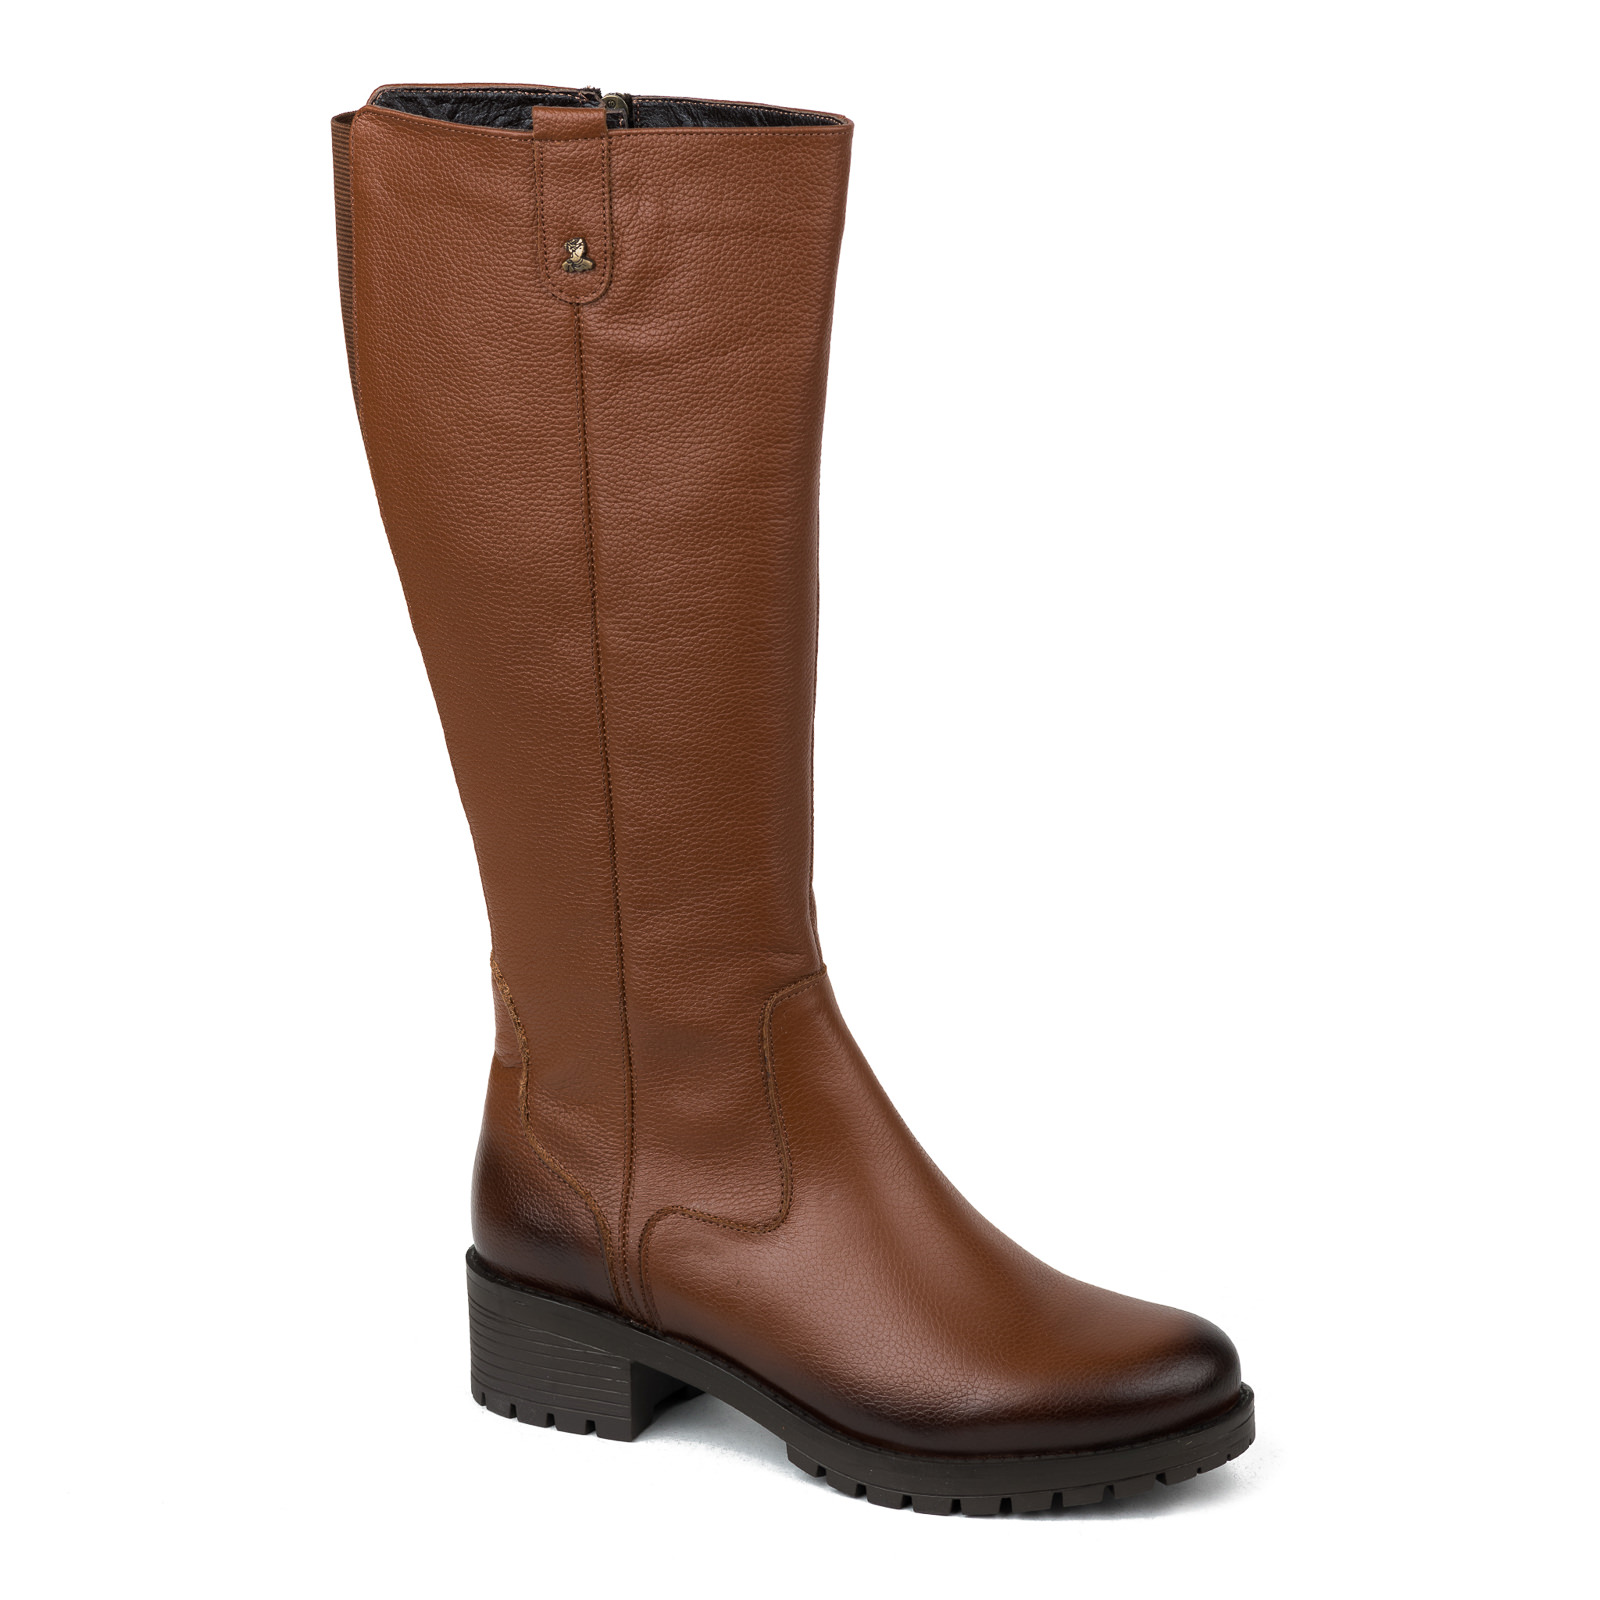 Leather boots B146 - CAMEL